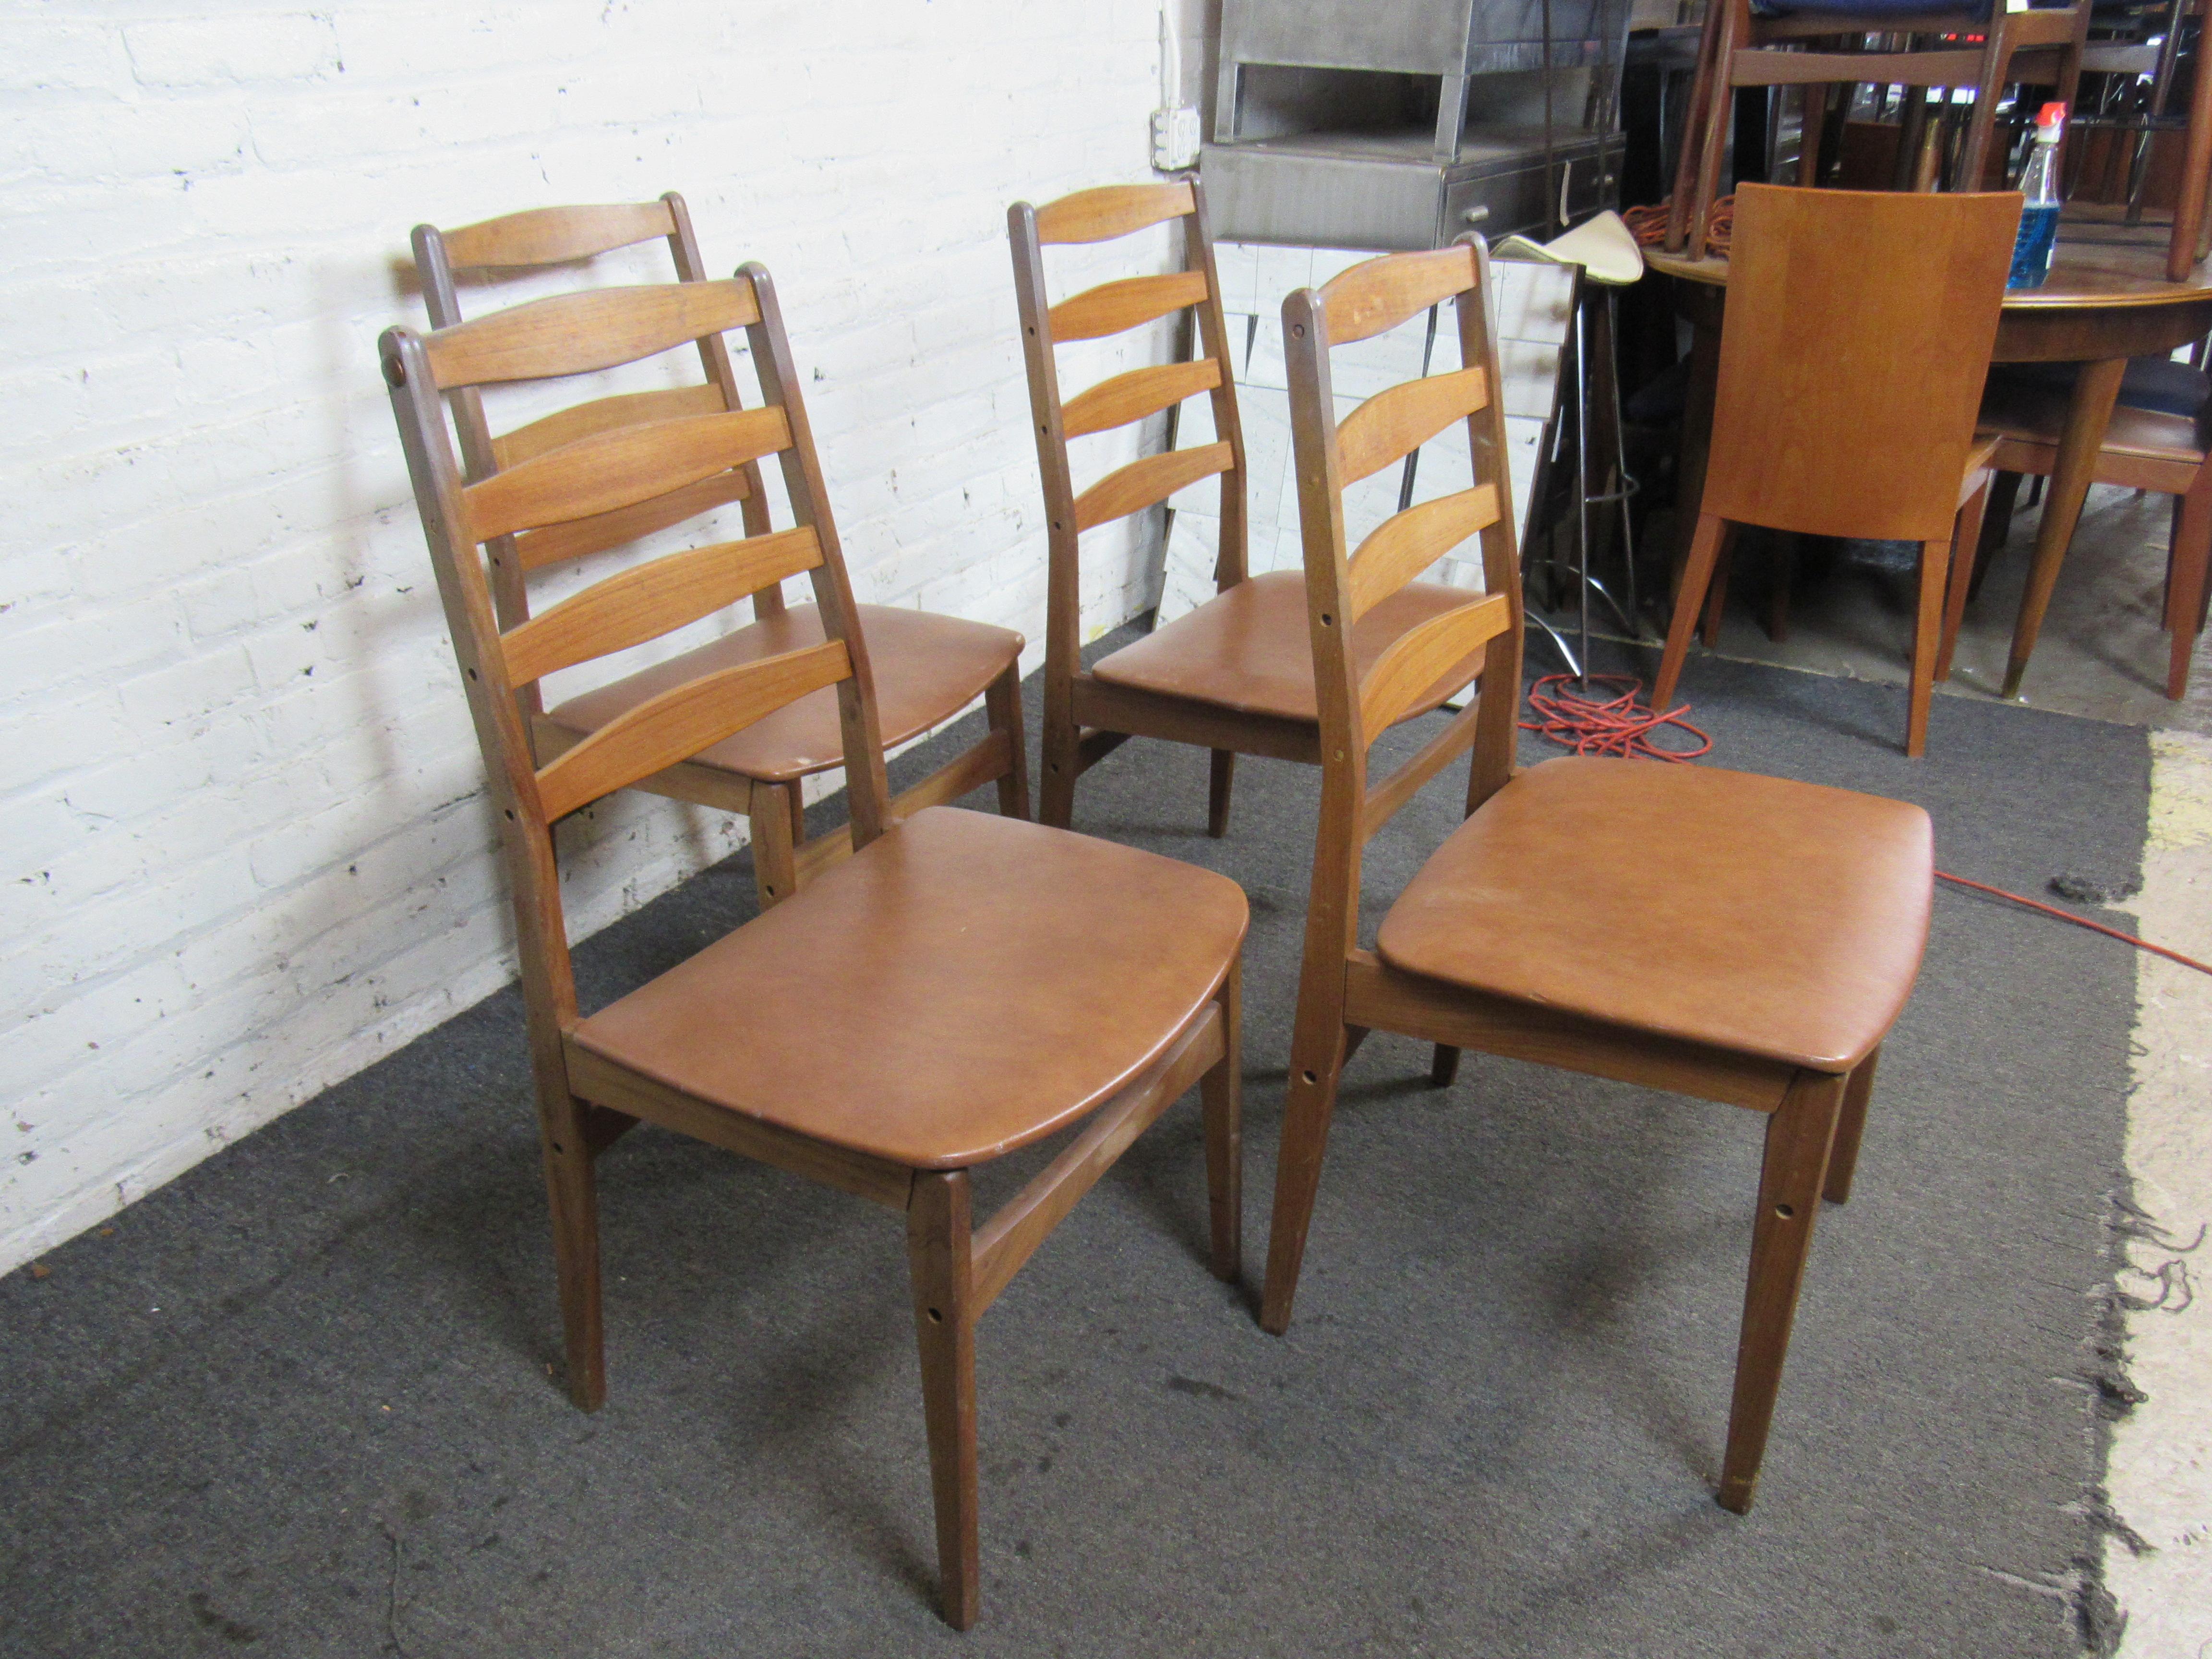 Pairing sculpted teak frames with upholstered vinyl seats, this set of four Danish dining chairs is a great way to add timeless and versatile Mid-Century Modern style to a dining room. Please confirm item location with seller (NY/NJ).